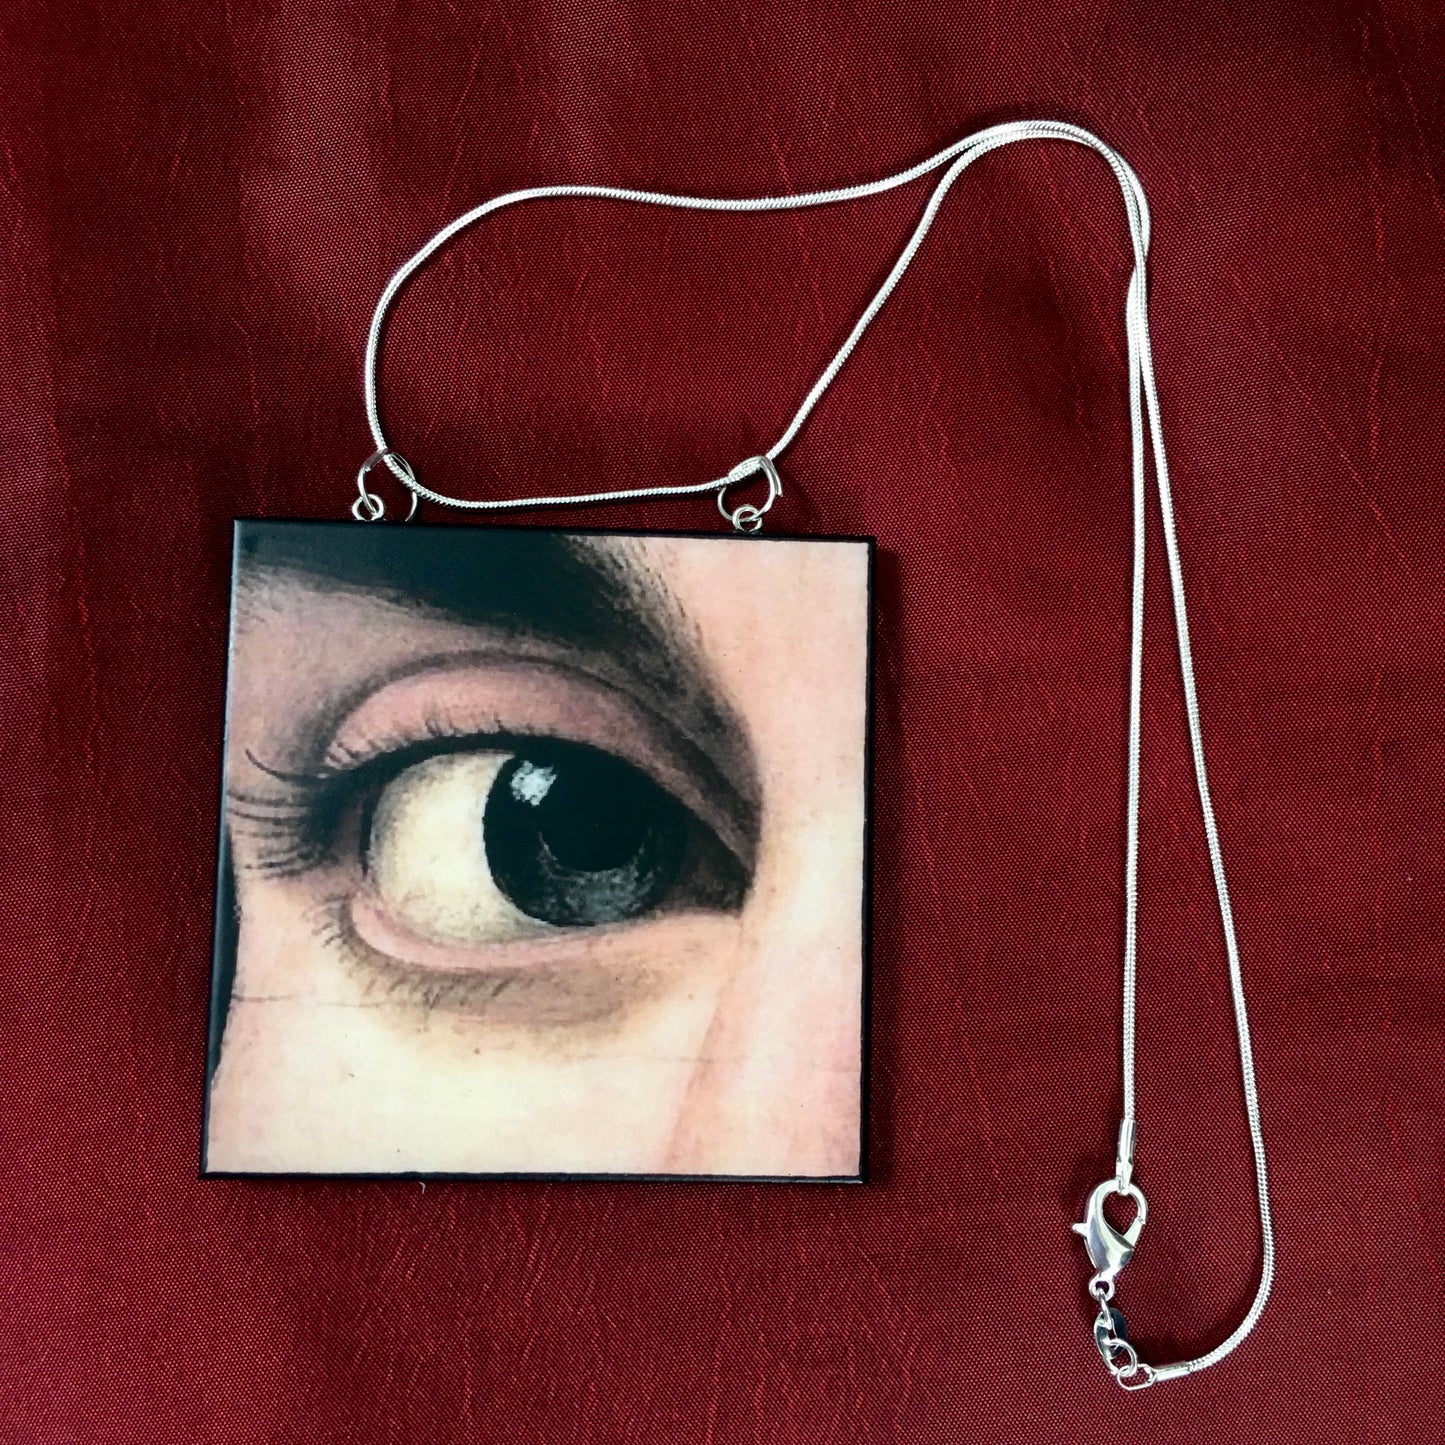 Sustainable wood pendant with an eye detail taken from a Renaissance art painting by Antonello da Messina. Handmade by Obljewellery